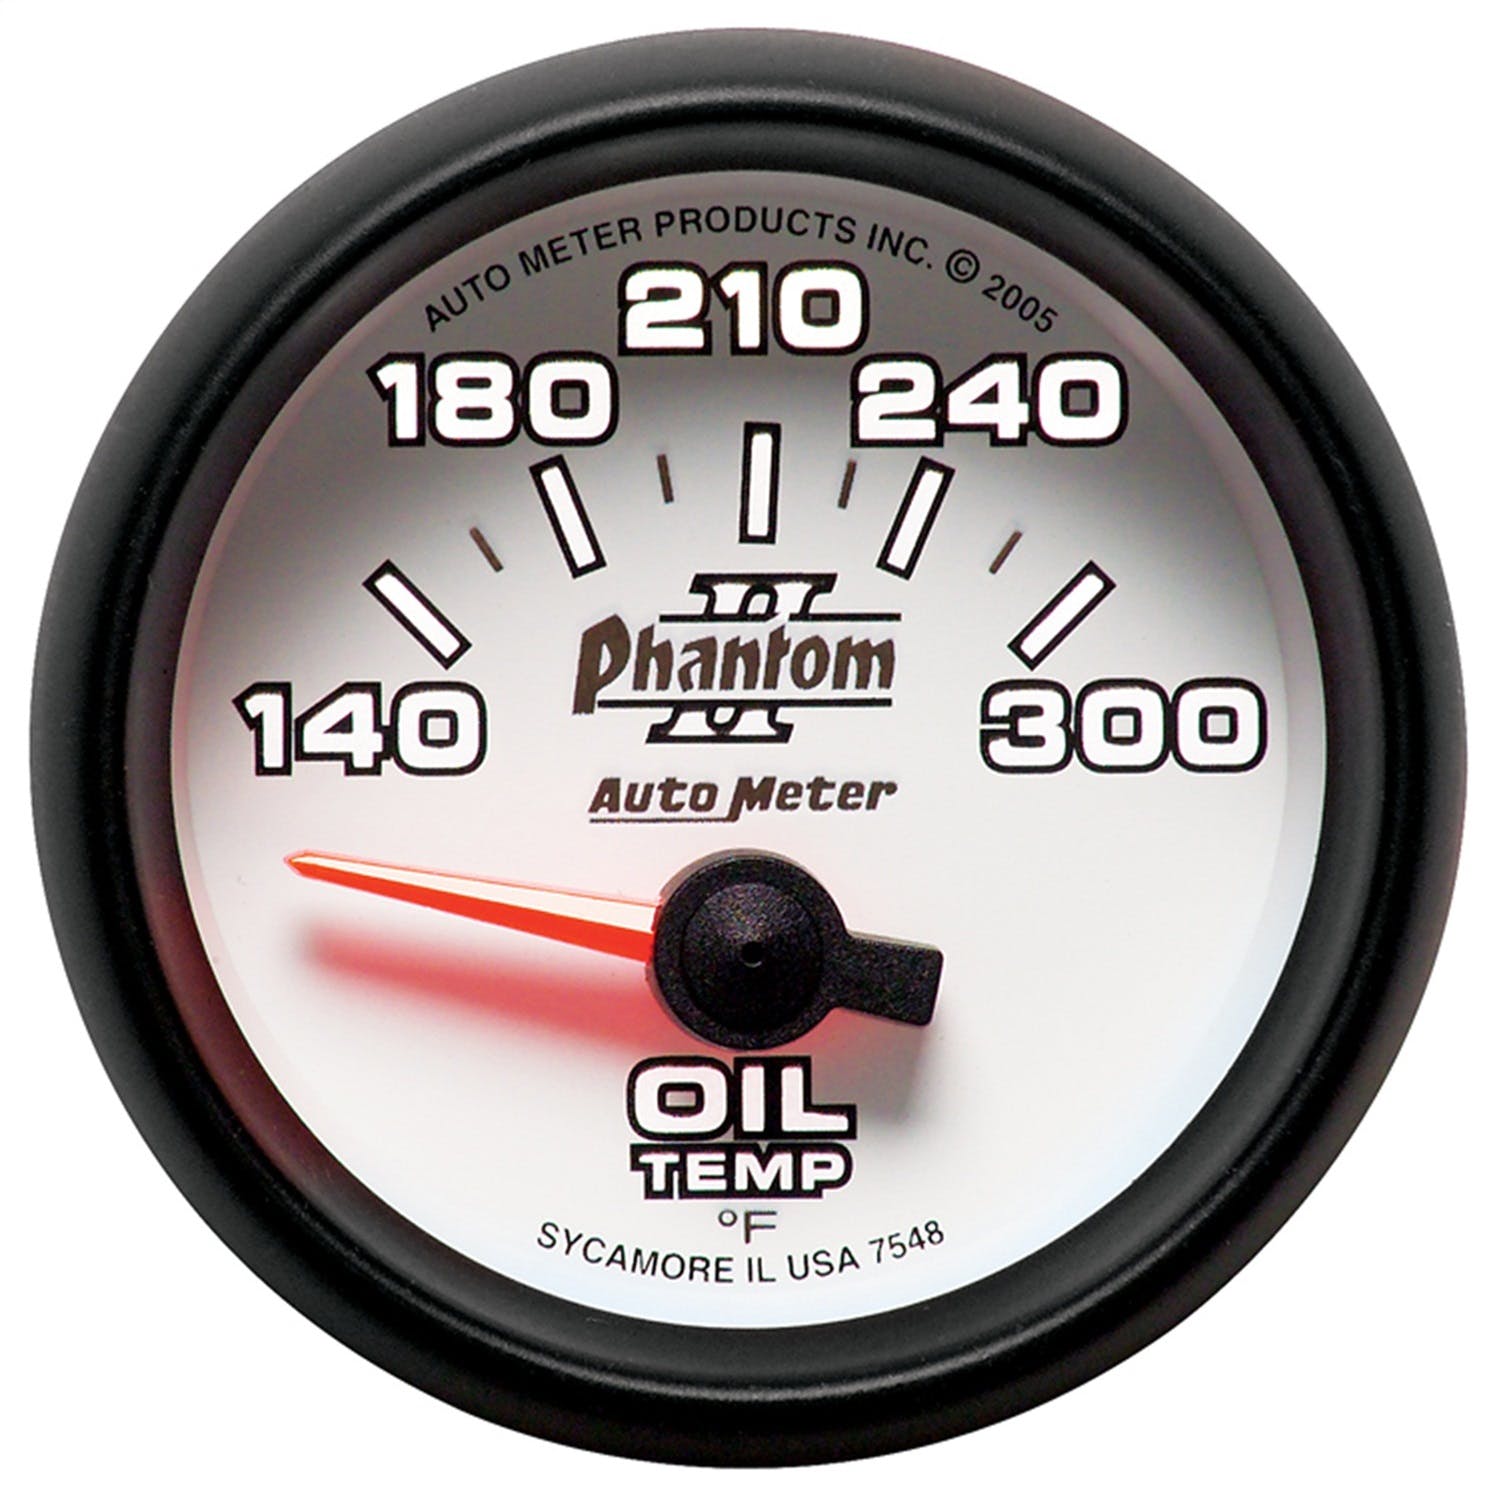 AutoMeter Products 7548 Gauge; Oil Temp; 2 1/16in.; 140-300° F; Electric; Phantom II